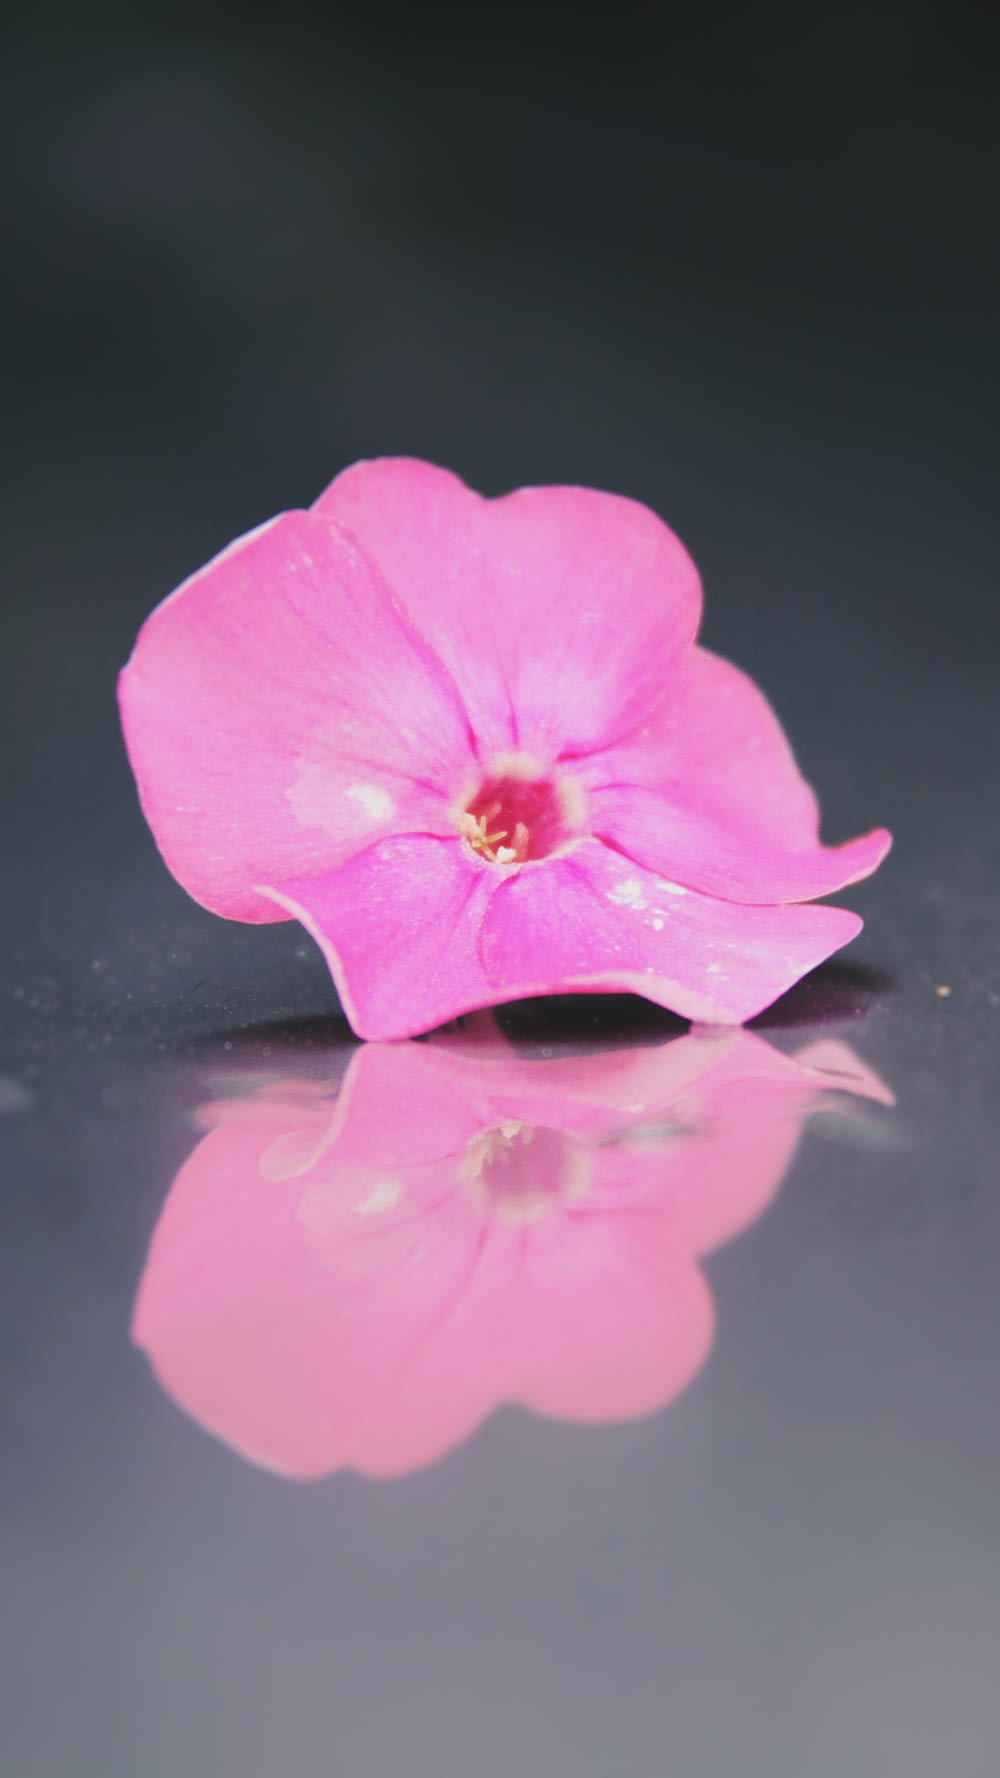 a pink flower is sitting on a reflective surface